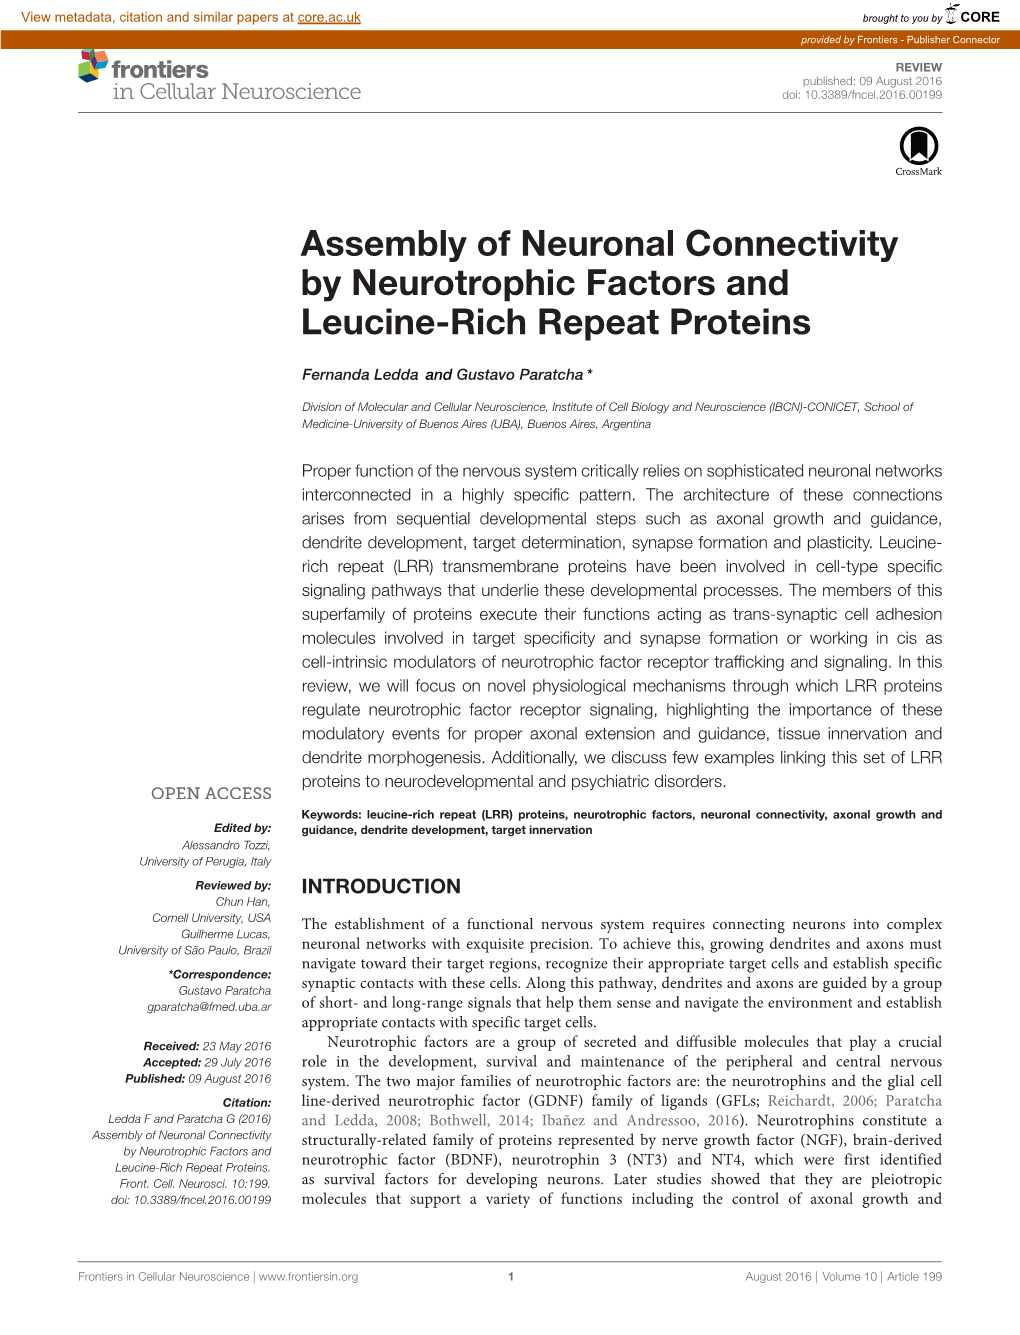 Assembly of Neuronal Connectivity by Neurotrophic Factors and Leucine-Rich Repeat Proteins